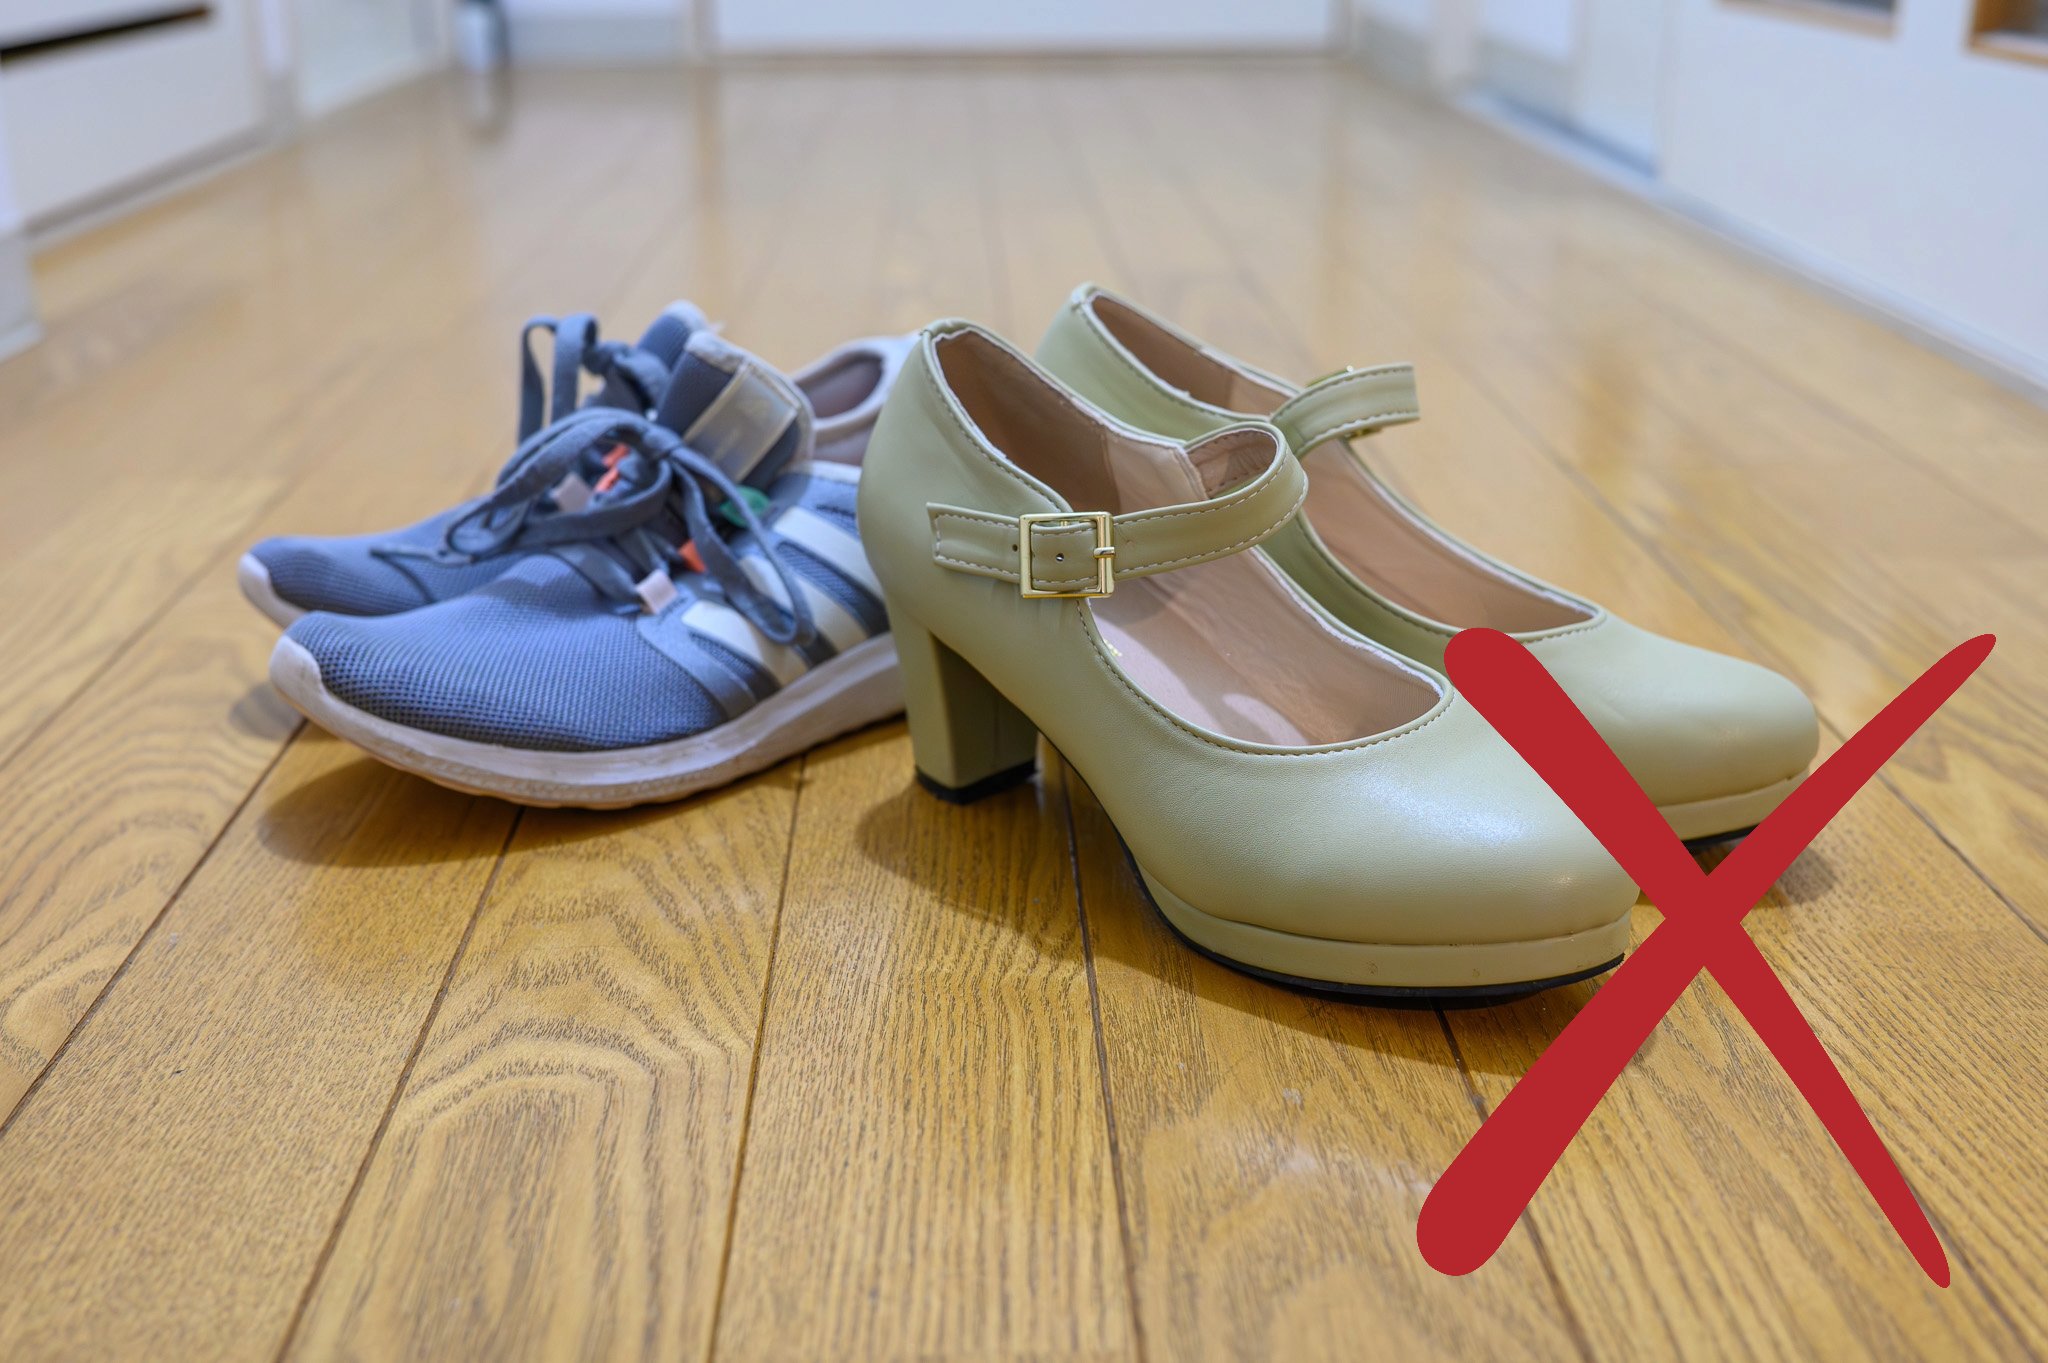 Two pairs of shoes on a wooden floor. One is a pair of heels, the other is a pair of trainers.